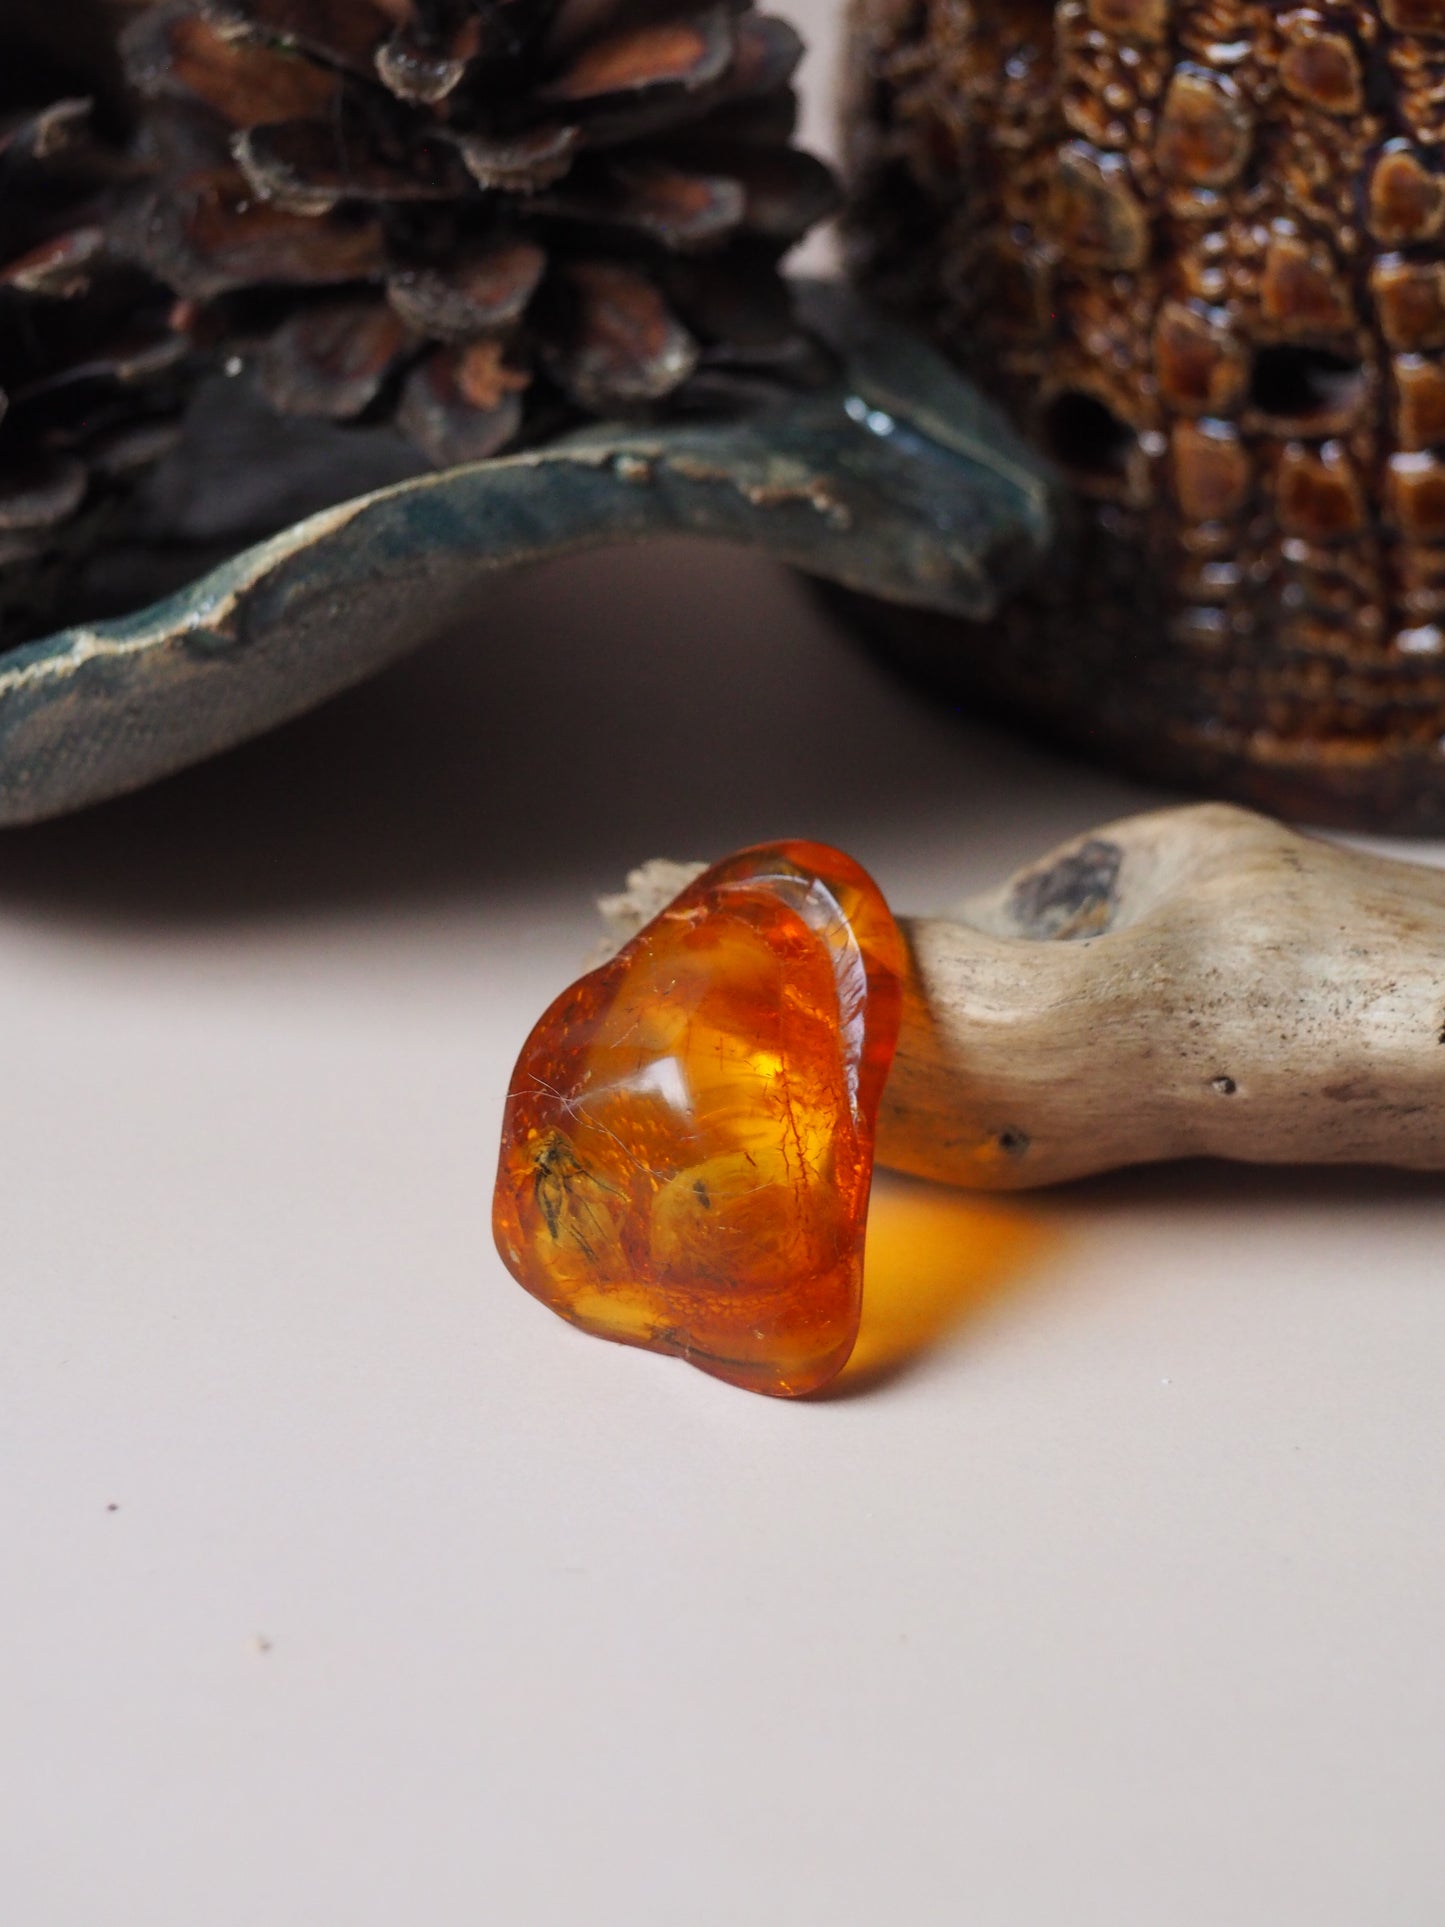 Unique Amber Piece with  Insects Inclusions - Mosquito and 2 Flies